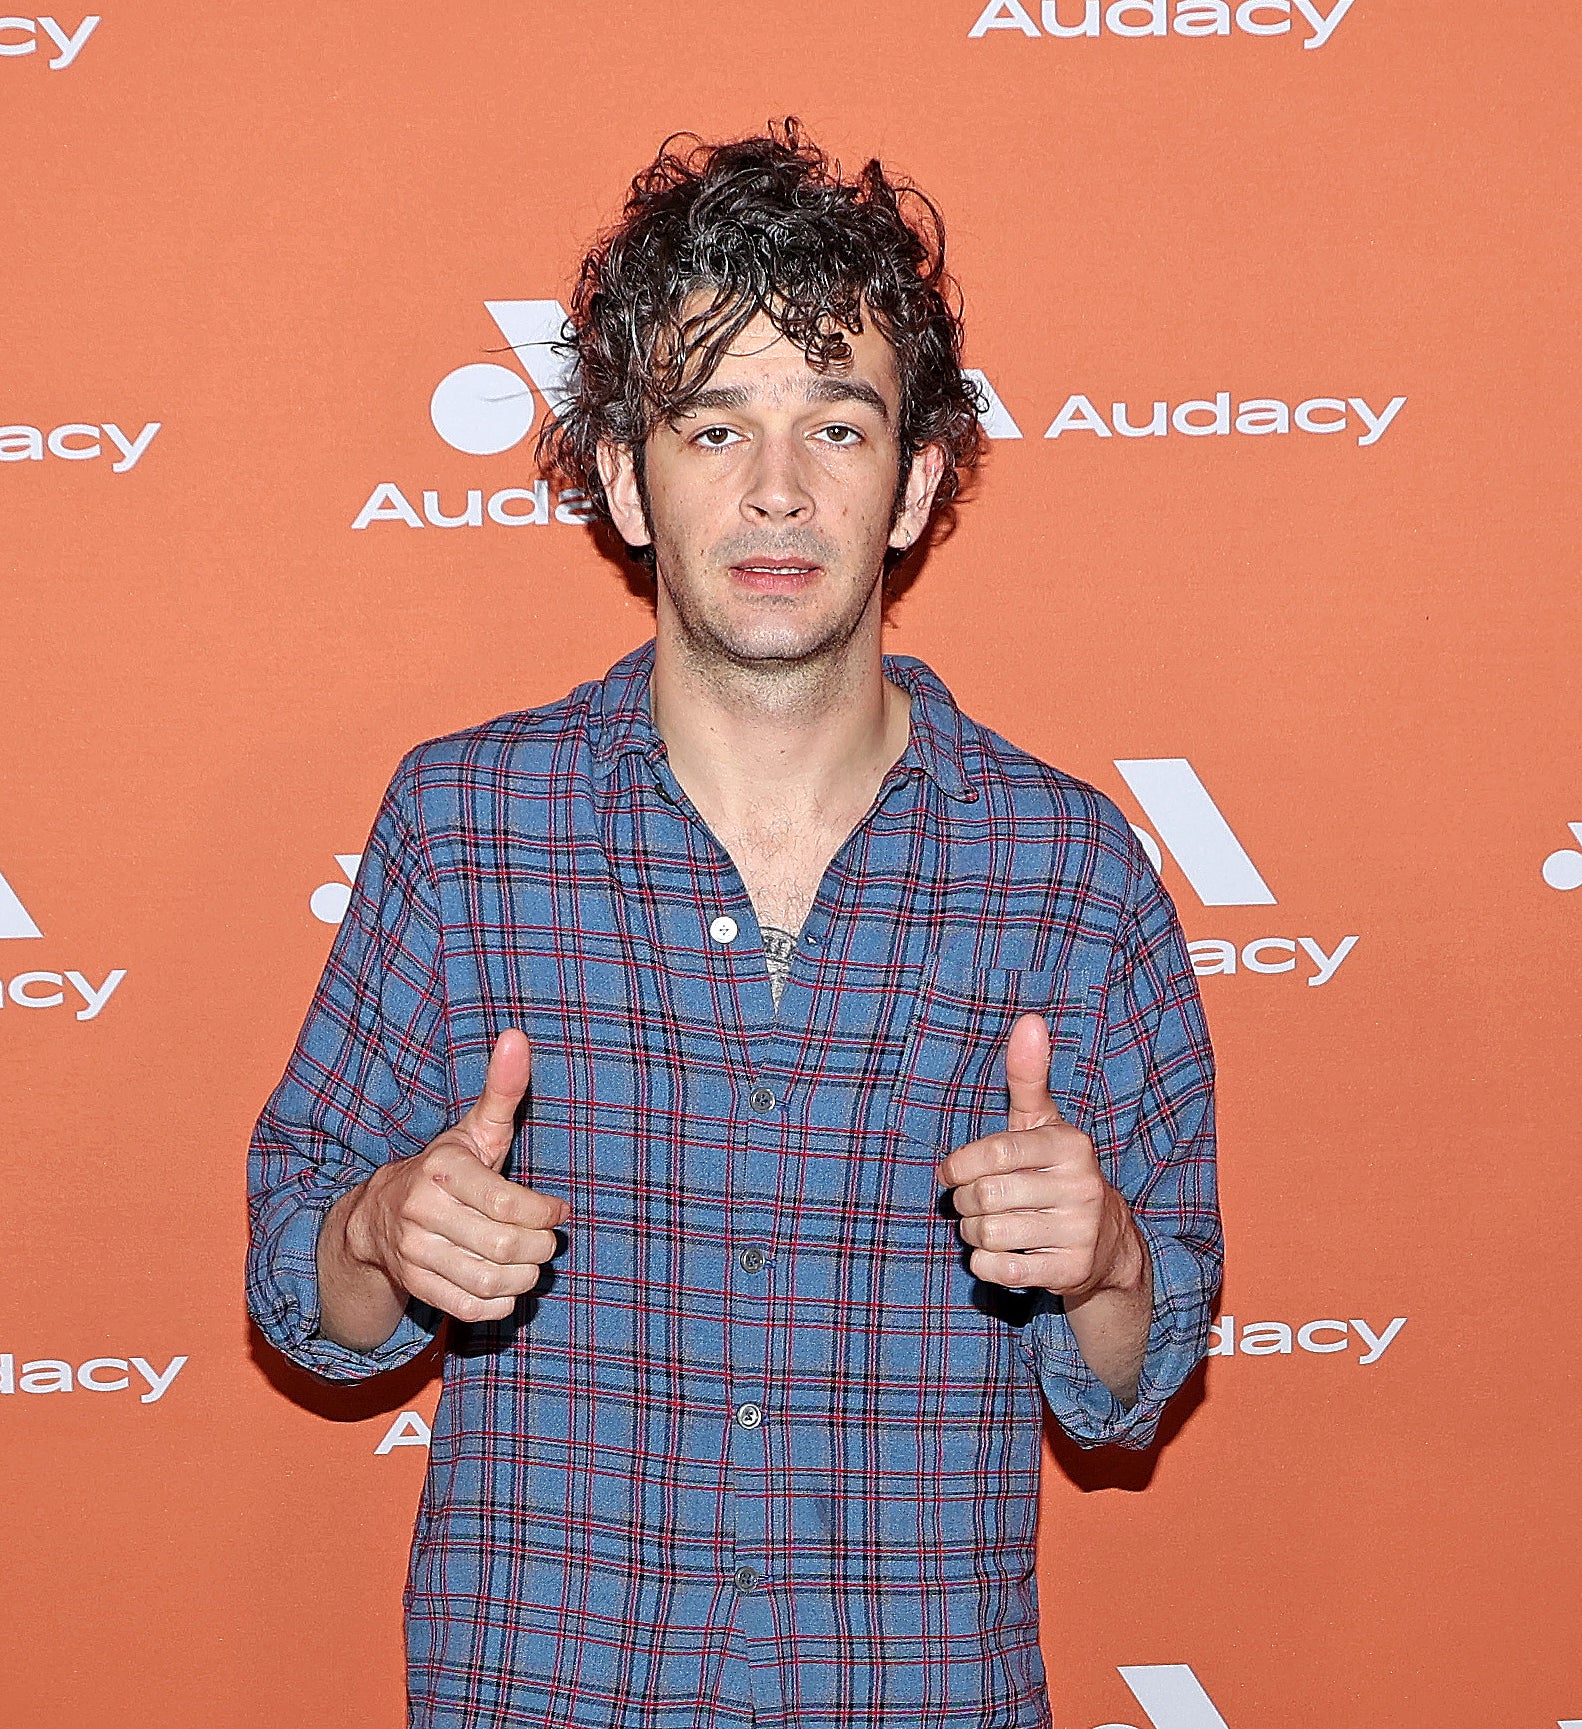 Matty Healy giving two thumbs up on the red carpet